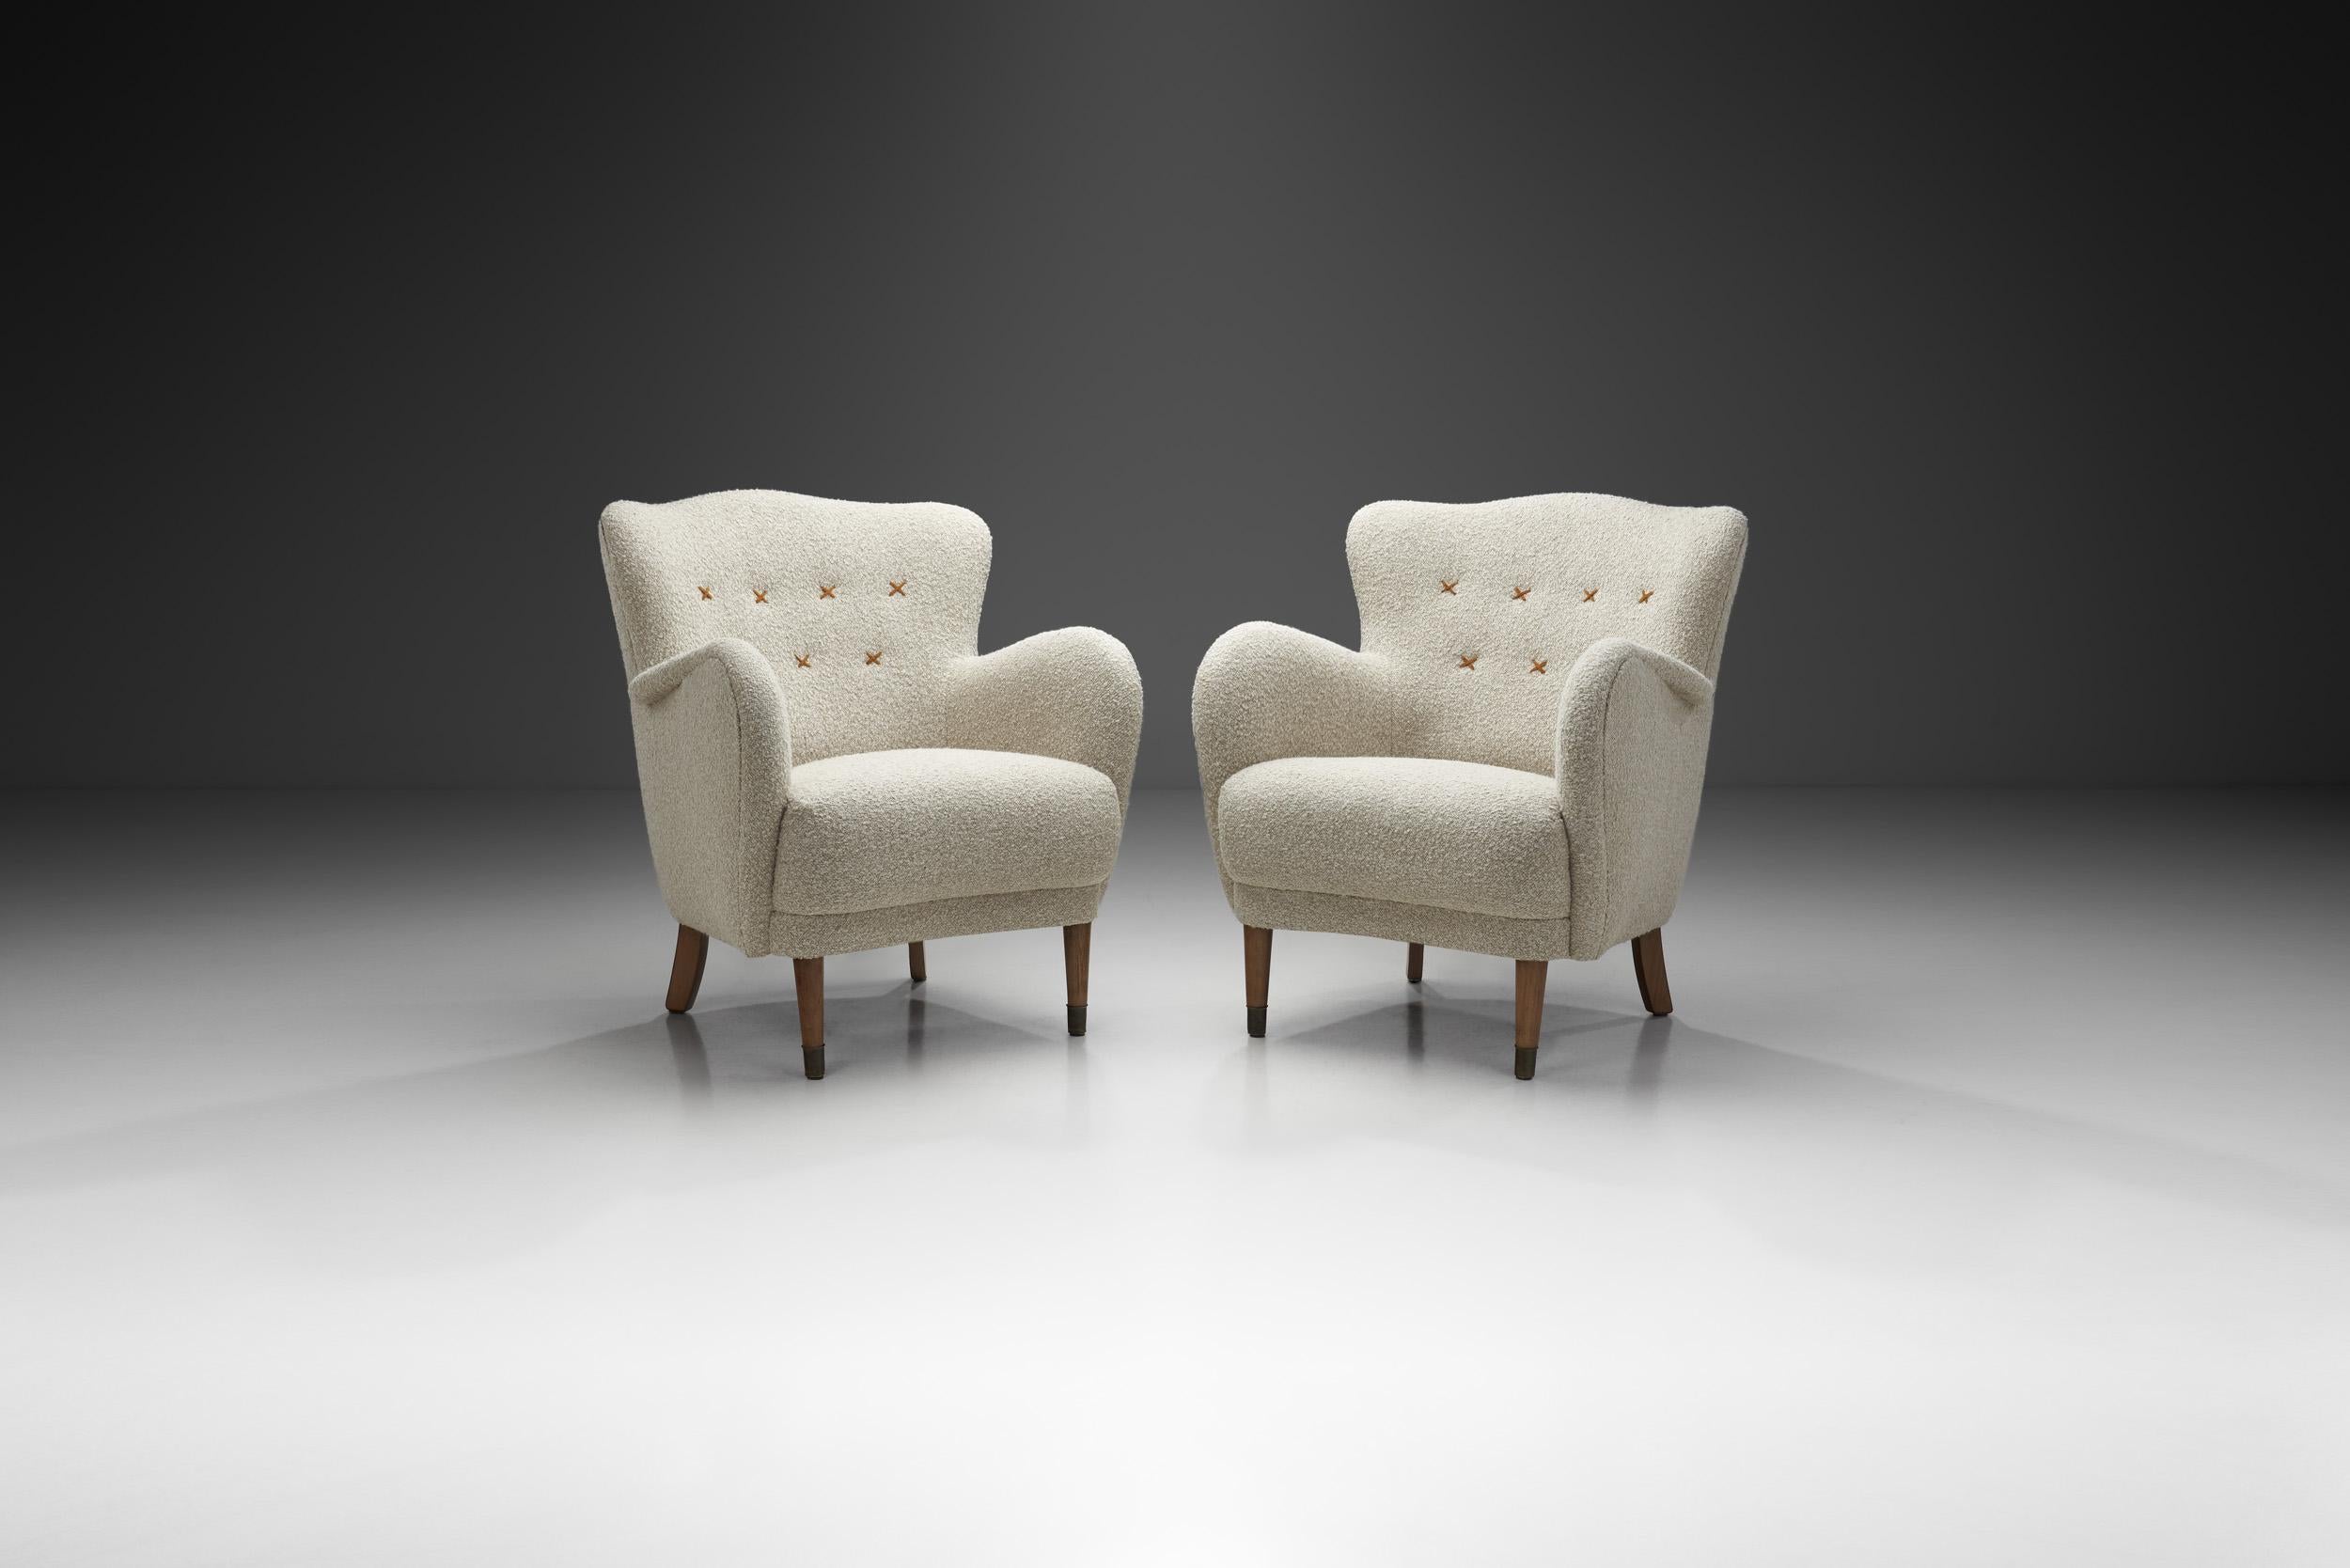 This pair from the era of Danish Art Deco is a beautiful testimony of the Scandinavian interpretation of the movement, while also showing early signs of modernism. Art Deco was a lush era in the history of design. The era flourished with the help of